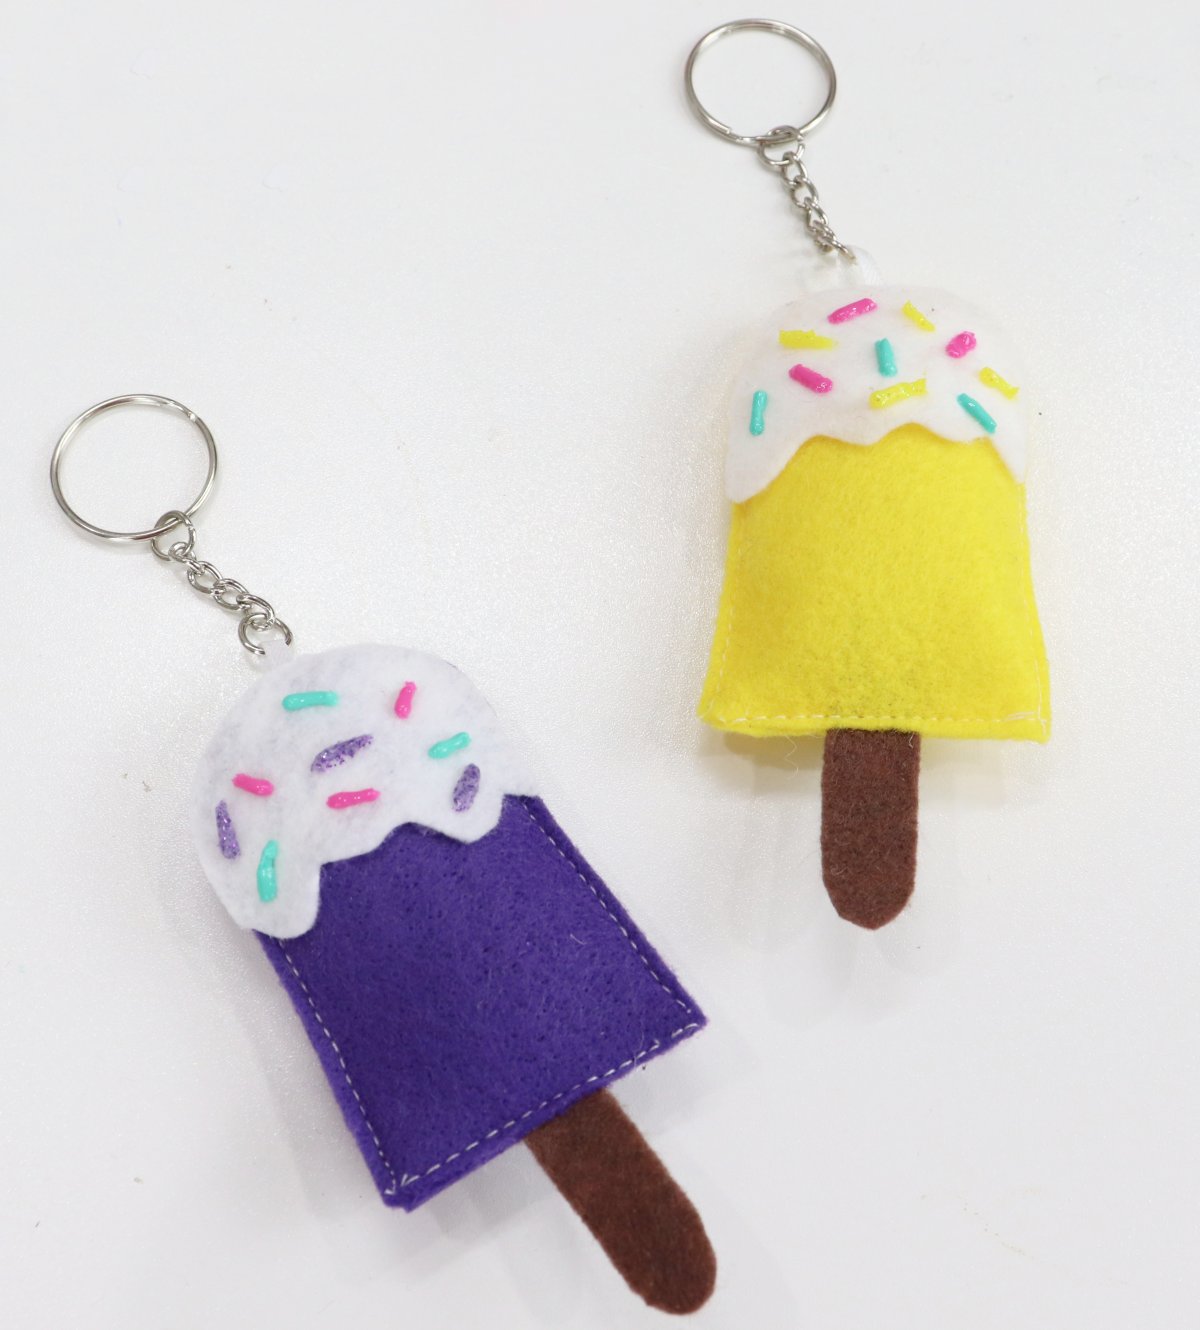 Image contains two felt popsicle keychains; one purple and one yellow, on a white table.